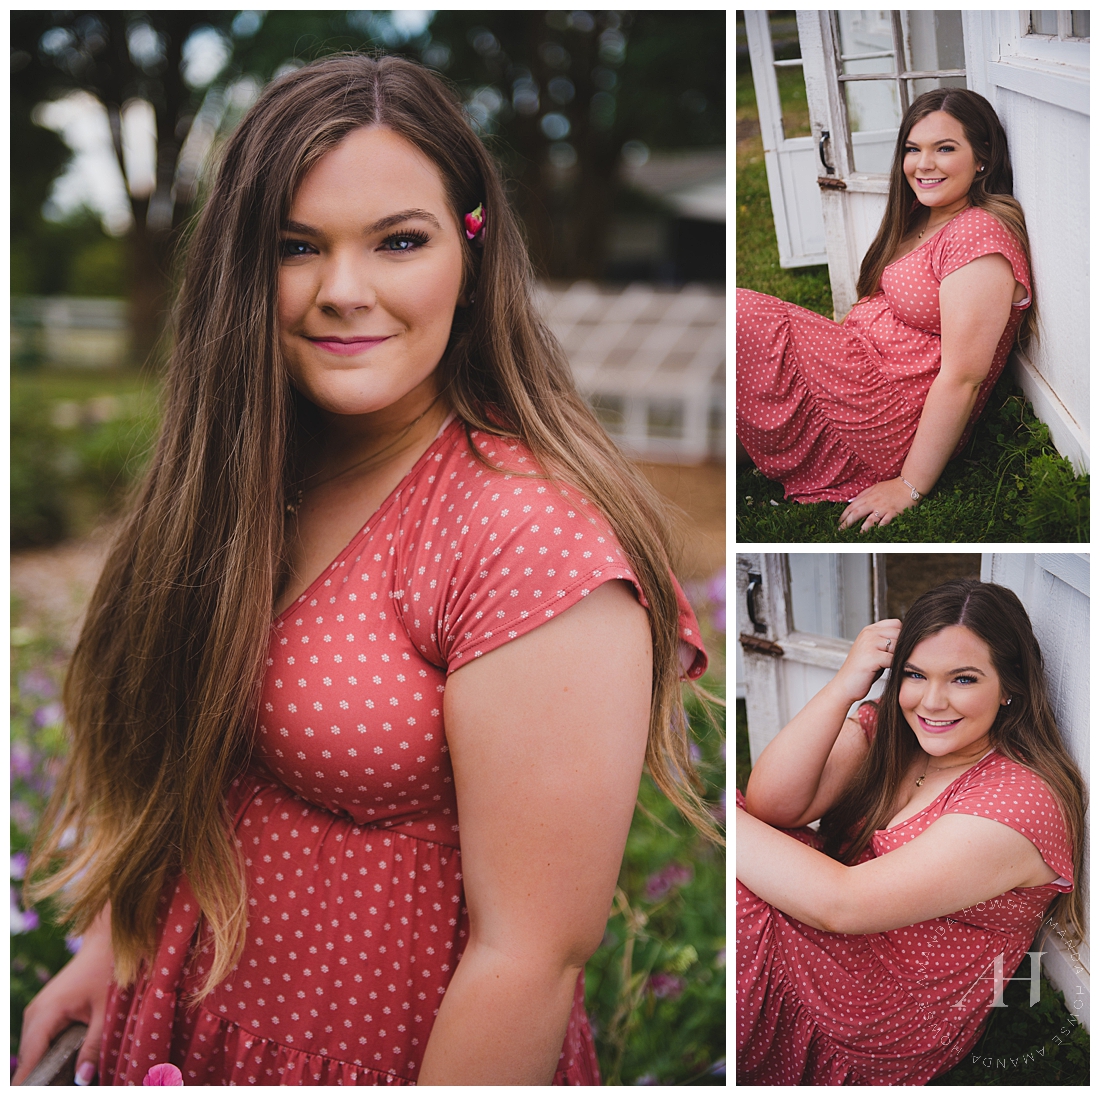 Outdoor Senior Portraits in Tacoma | Long Hair Ideas for Senior Portraits, How to Accessorize for Senior Portraits, Summer Outfit Ideas, Makeup Inspiration for Seniors | Photographed by the Best Tacoma Senior Photographer Amanda Howse Photography